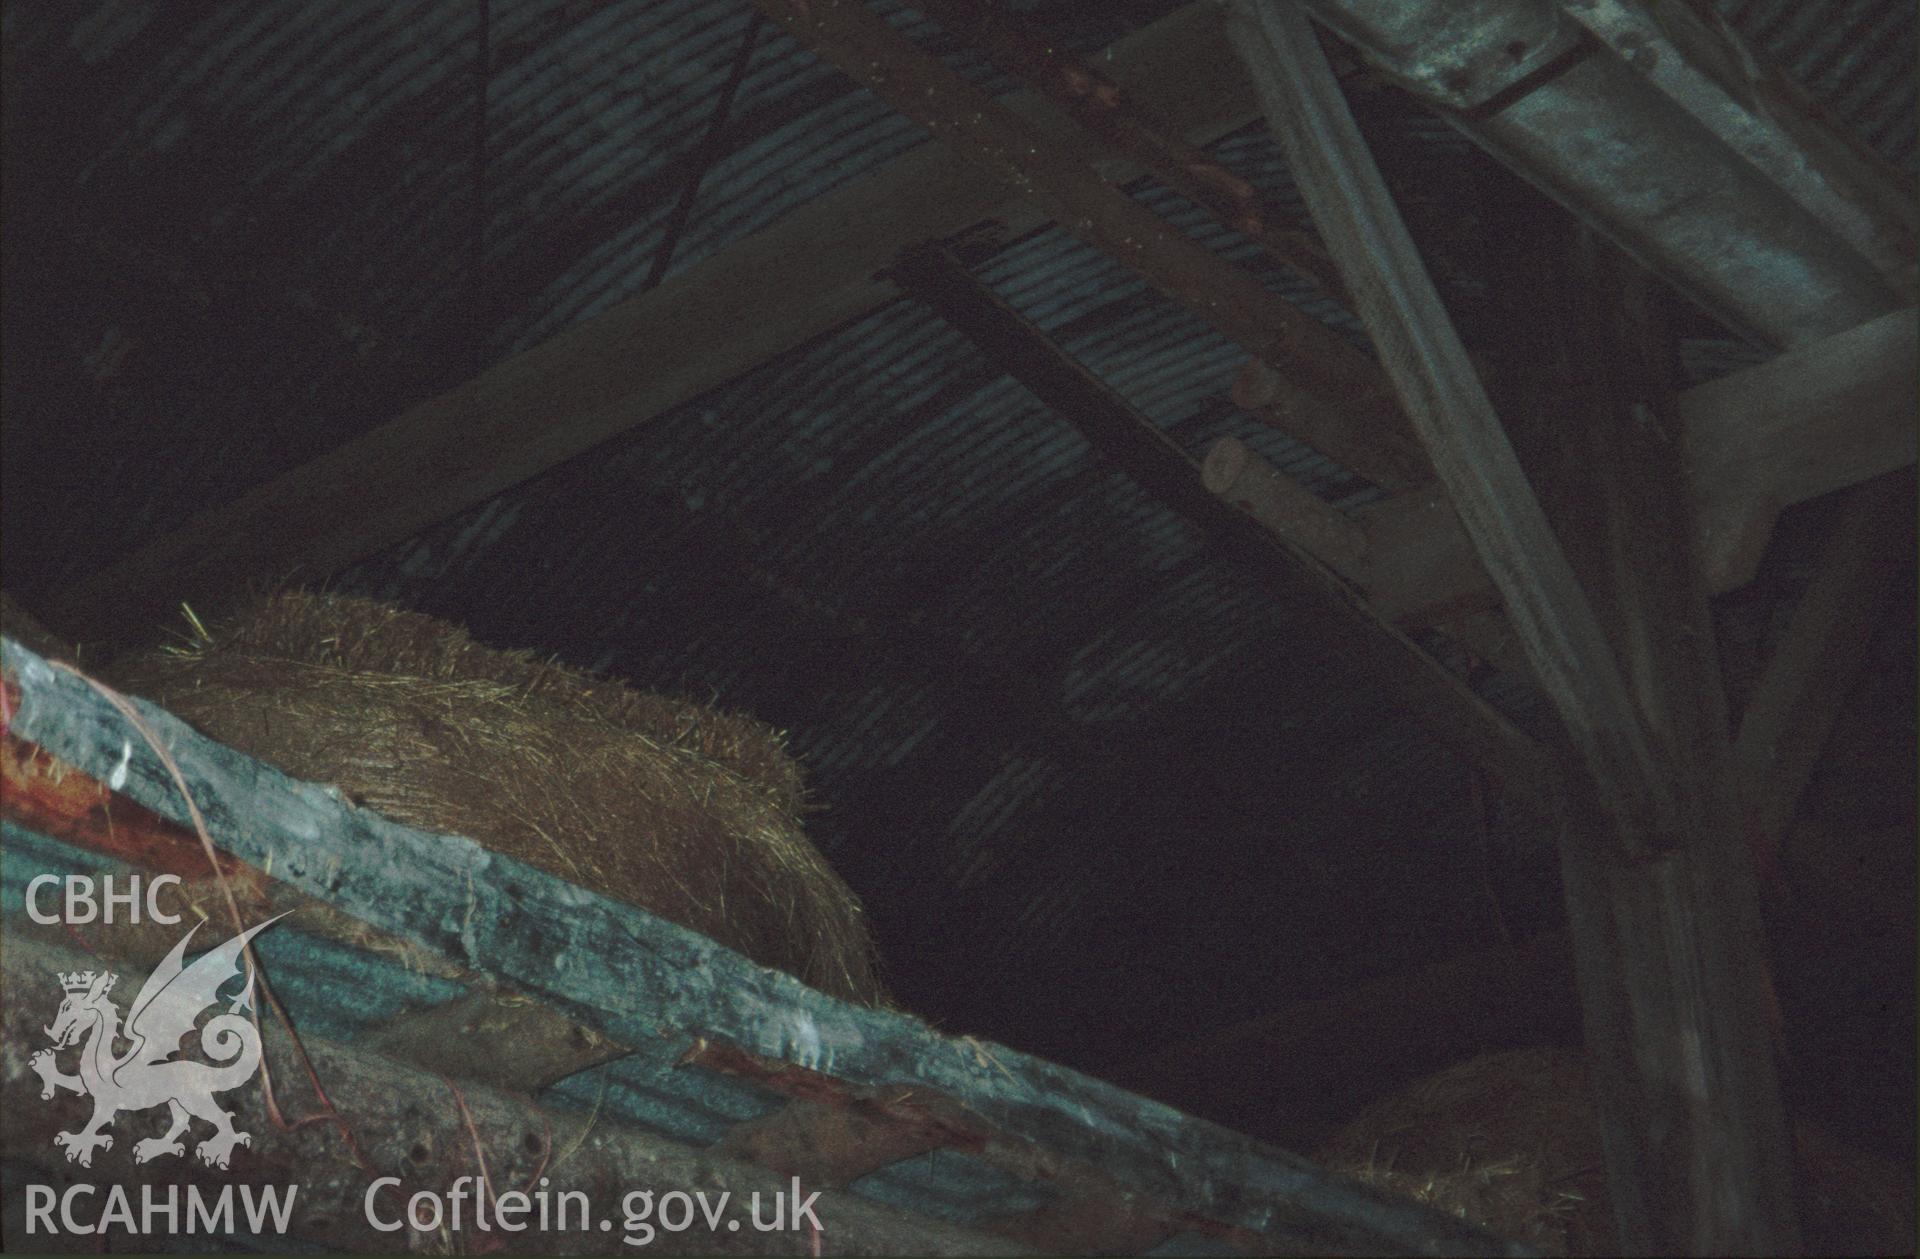 Digital copy of a colour slide showing interior roof structure at Pilleth Court Farm Building.